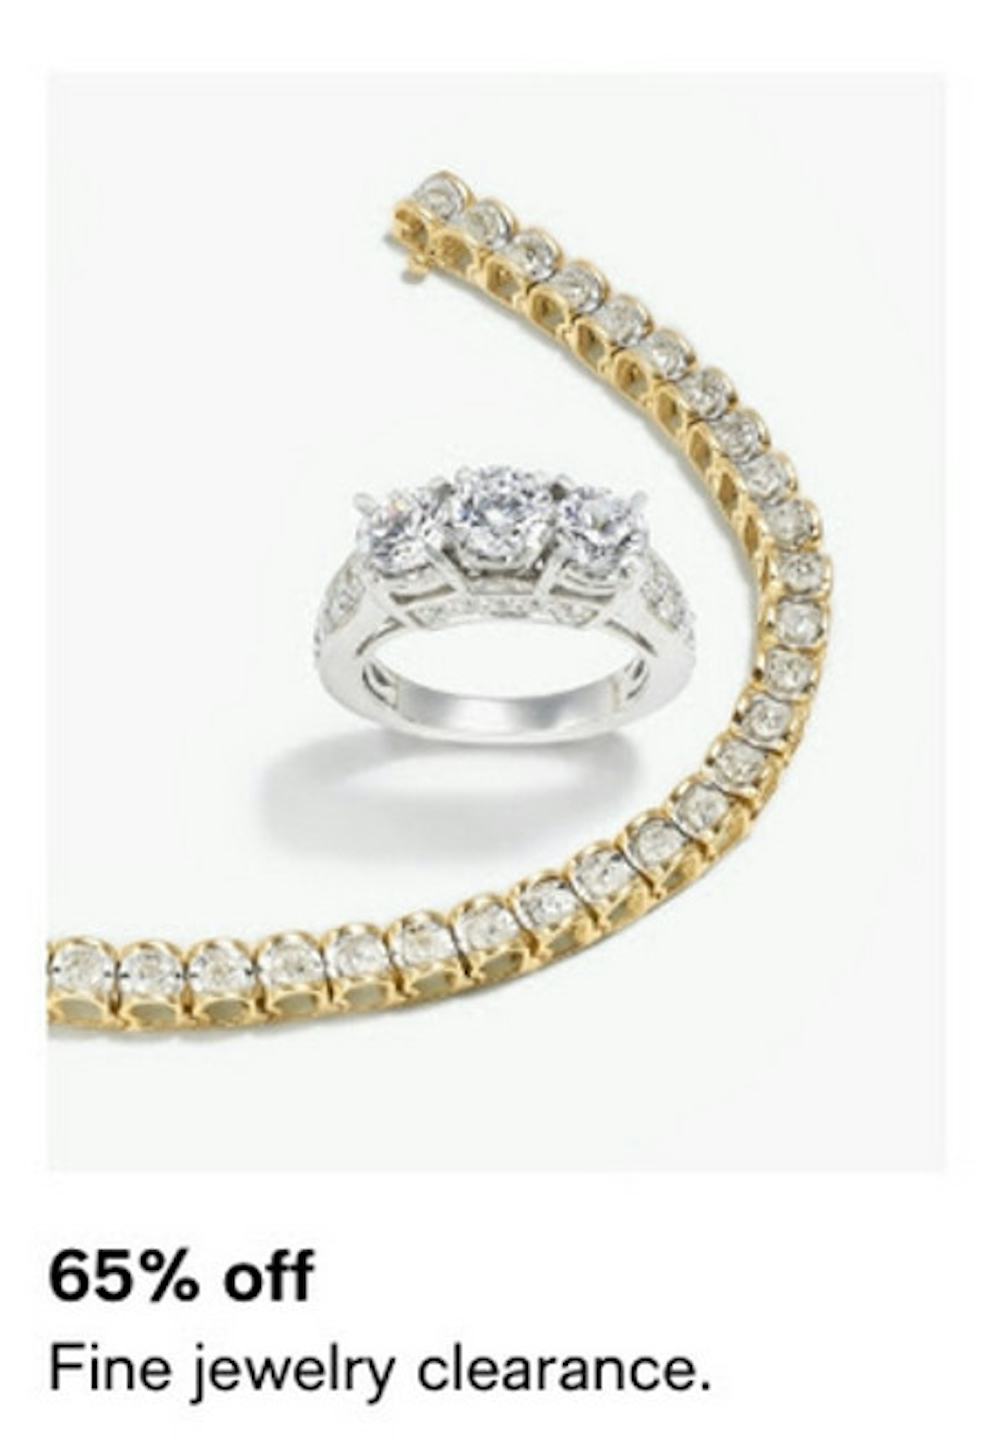 65% Off Fine Jewelry Clearance